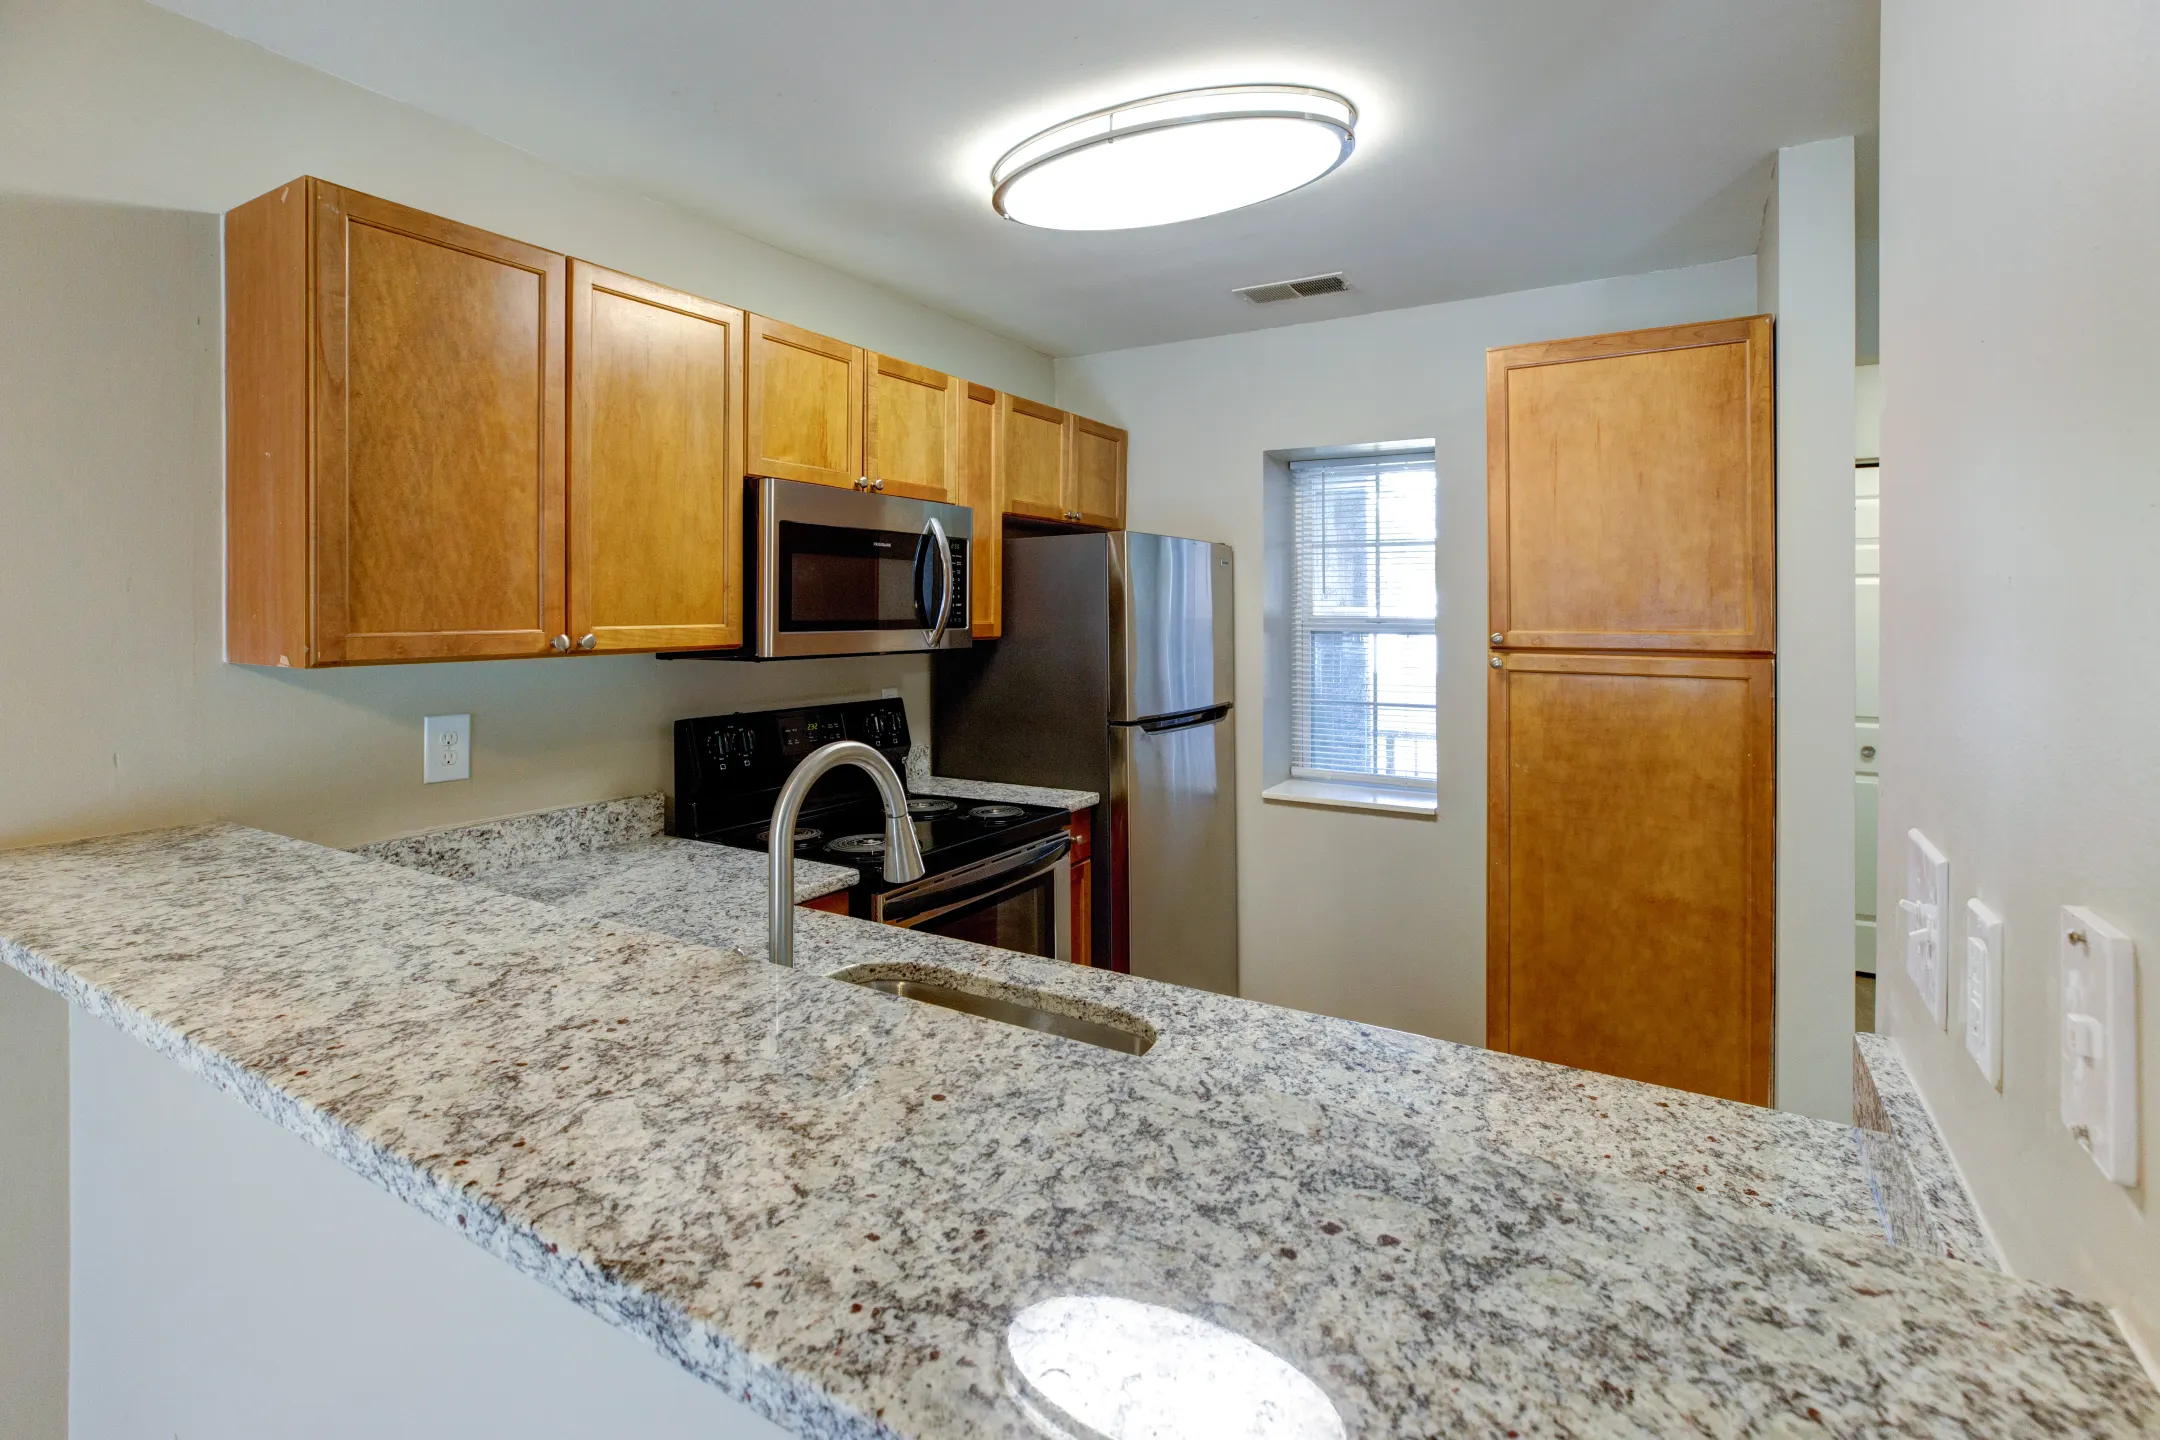 Kitchen - The Pointe at Canton Apartments & Townhomes - Canton, MI